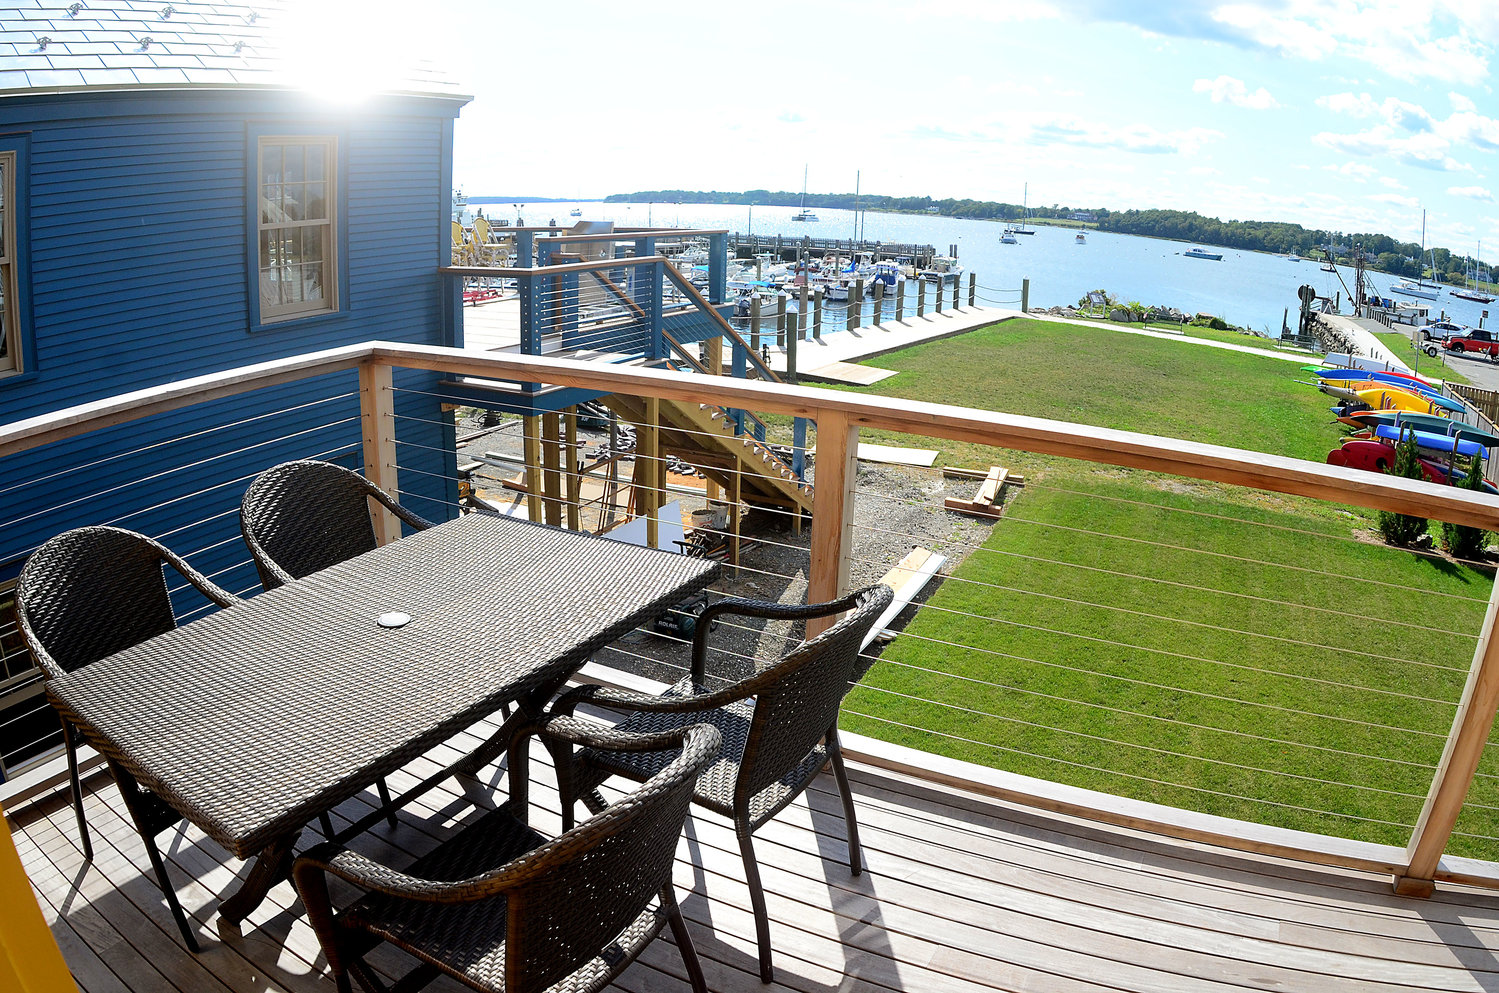 The view from the second-story deck of 211 Thames St., overlooking the State Street dock and Bristol Harbor.